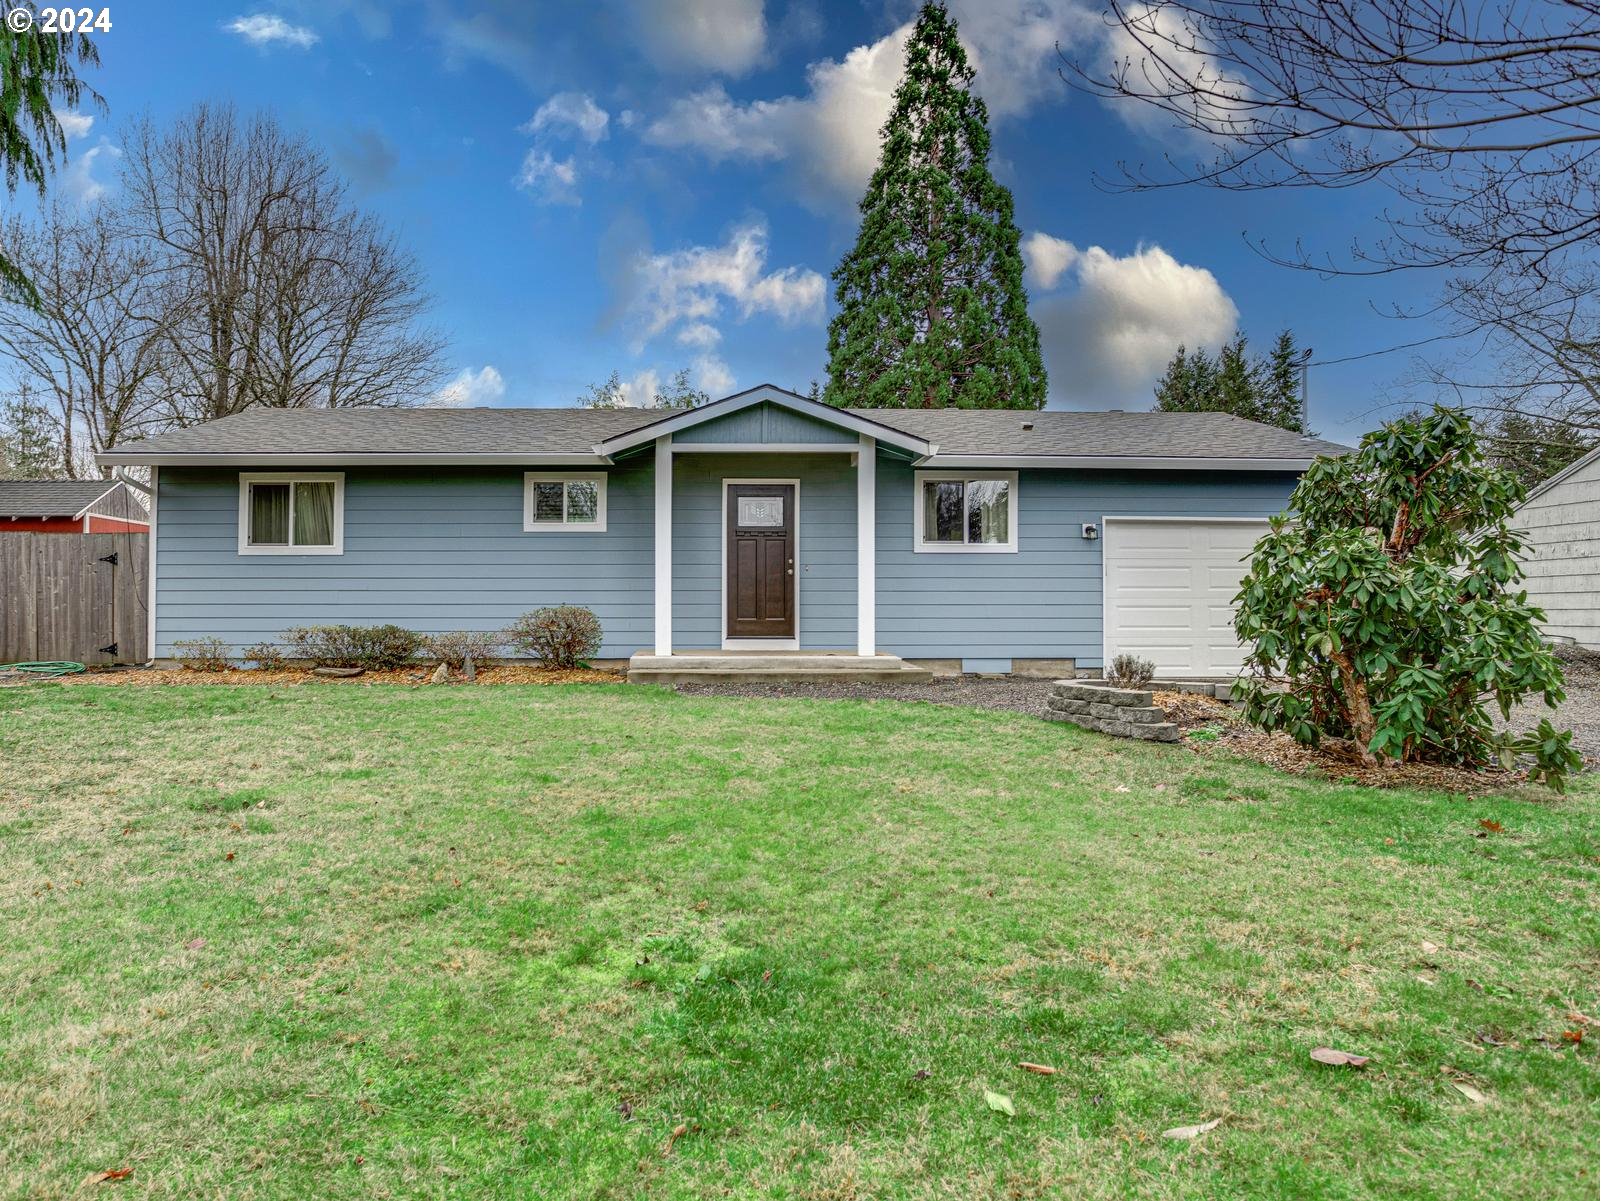 38916 SANDY HEIGHTS ST, Sandy, OR 